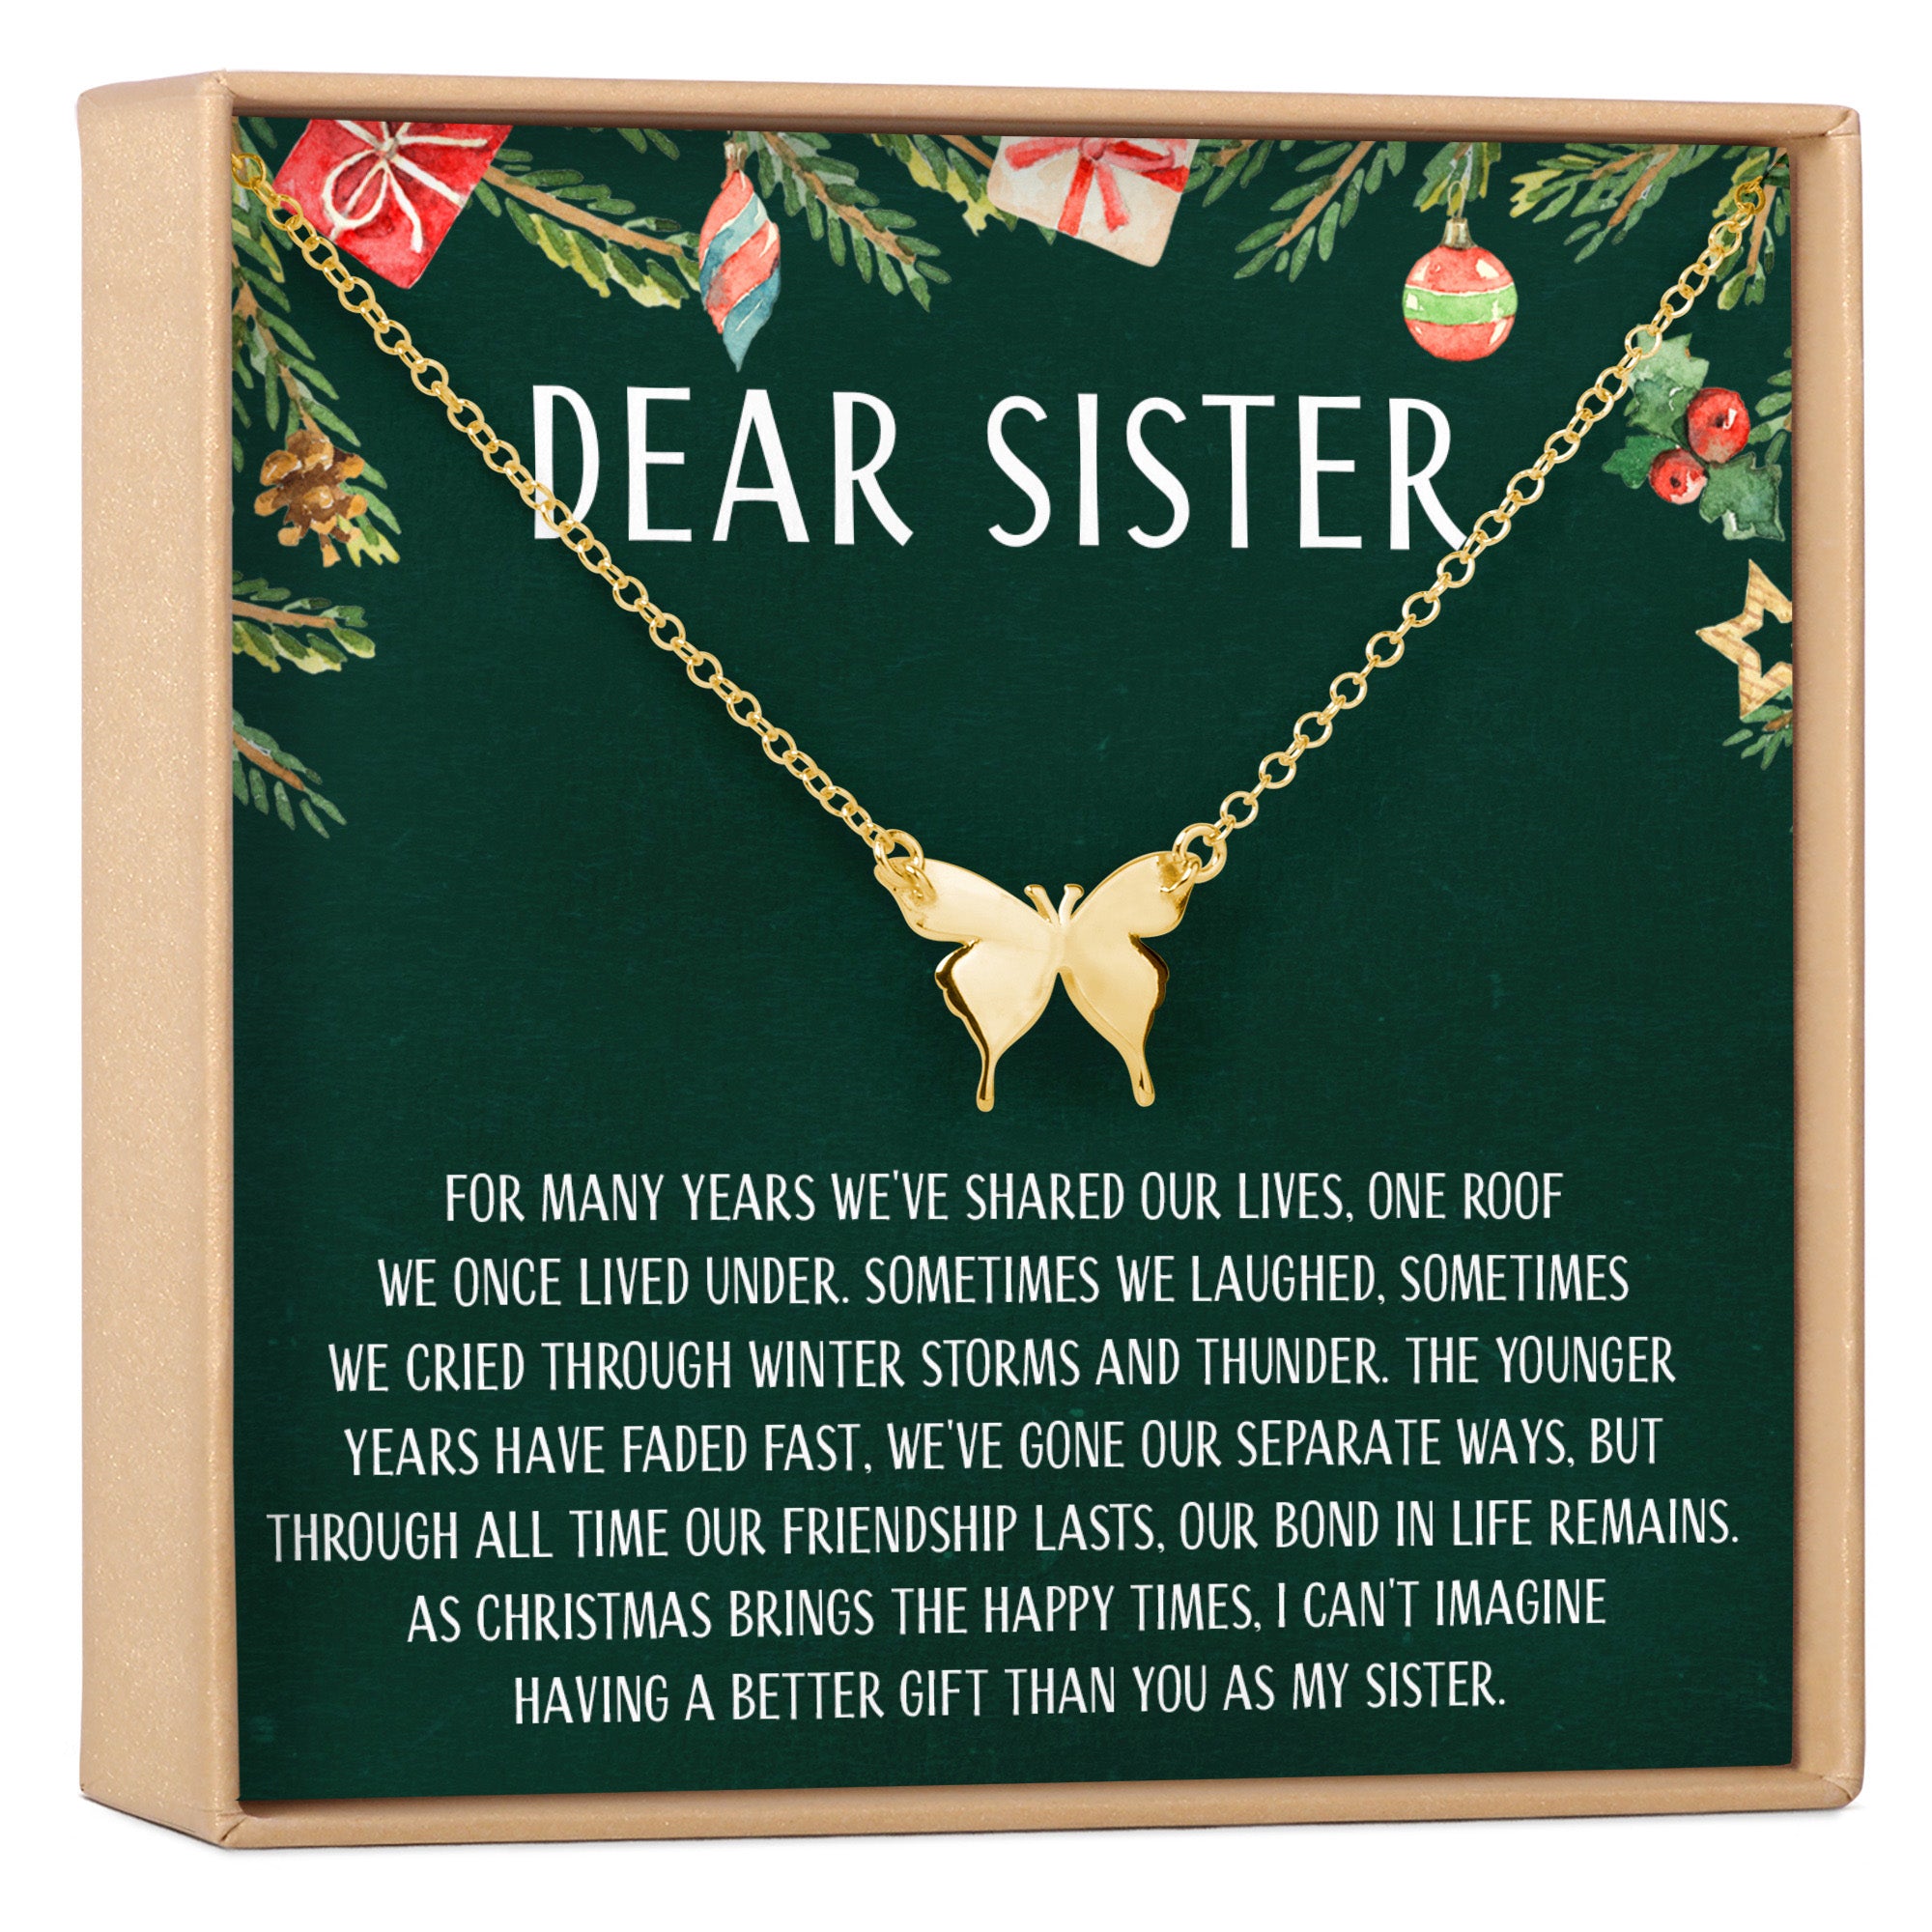 Christmas Gift for Sister: Present, Jewelry, Xmas Gift, Holiday Gift, Gift Idea, Sister Gift 